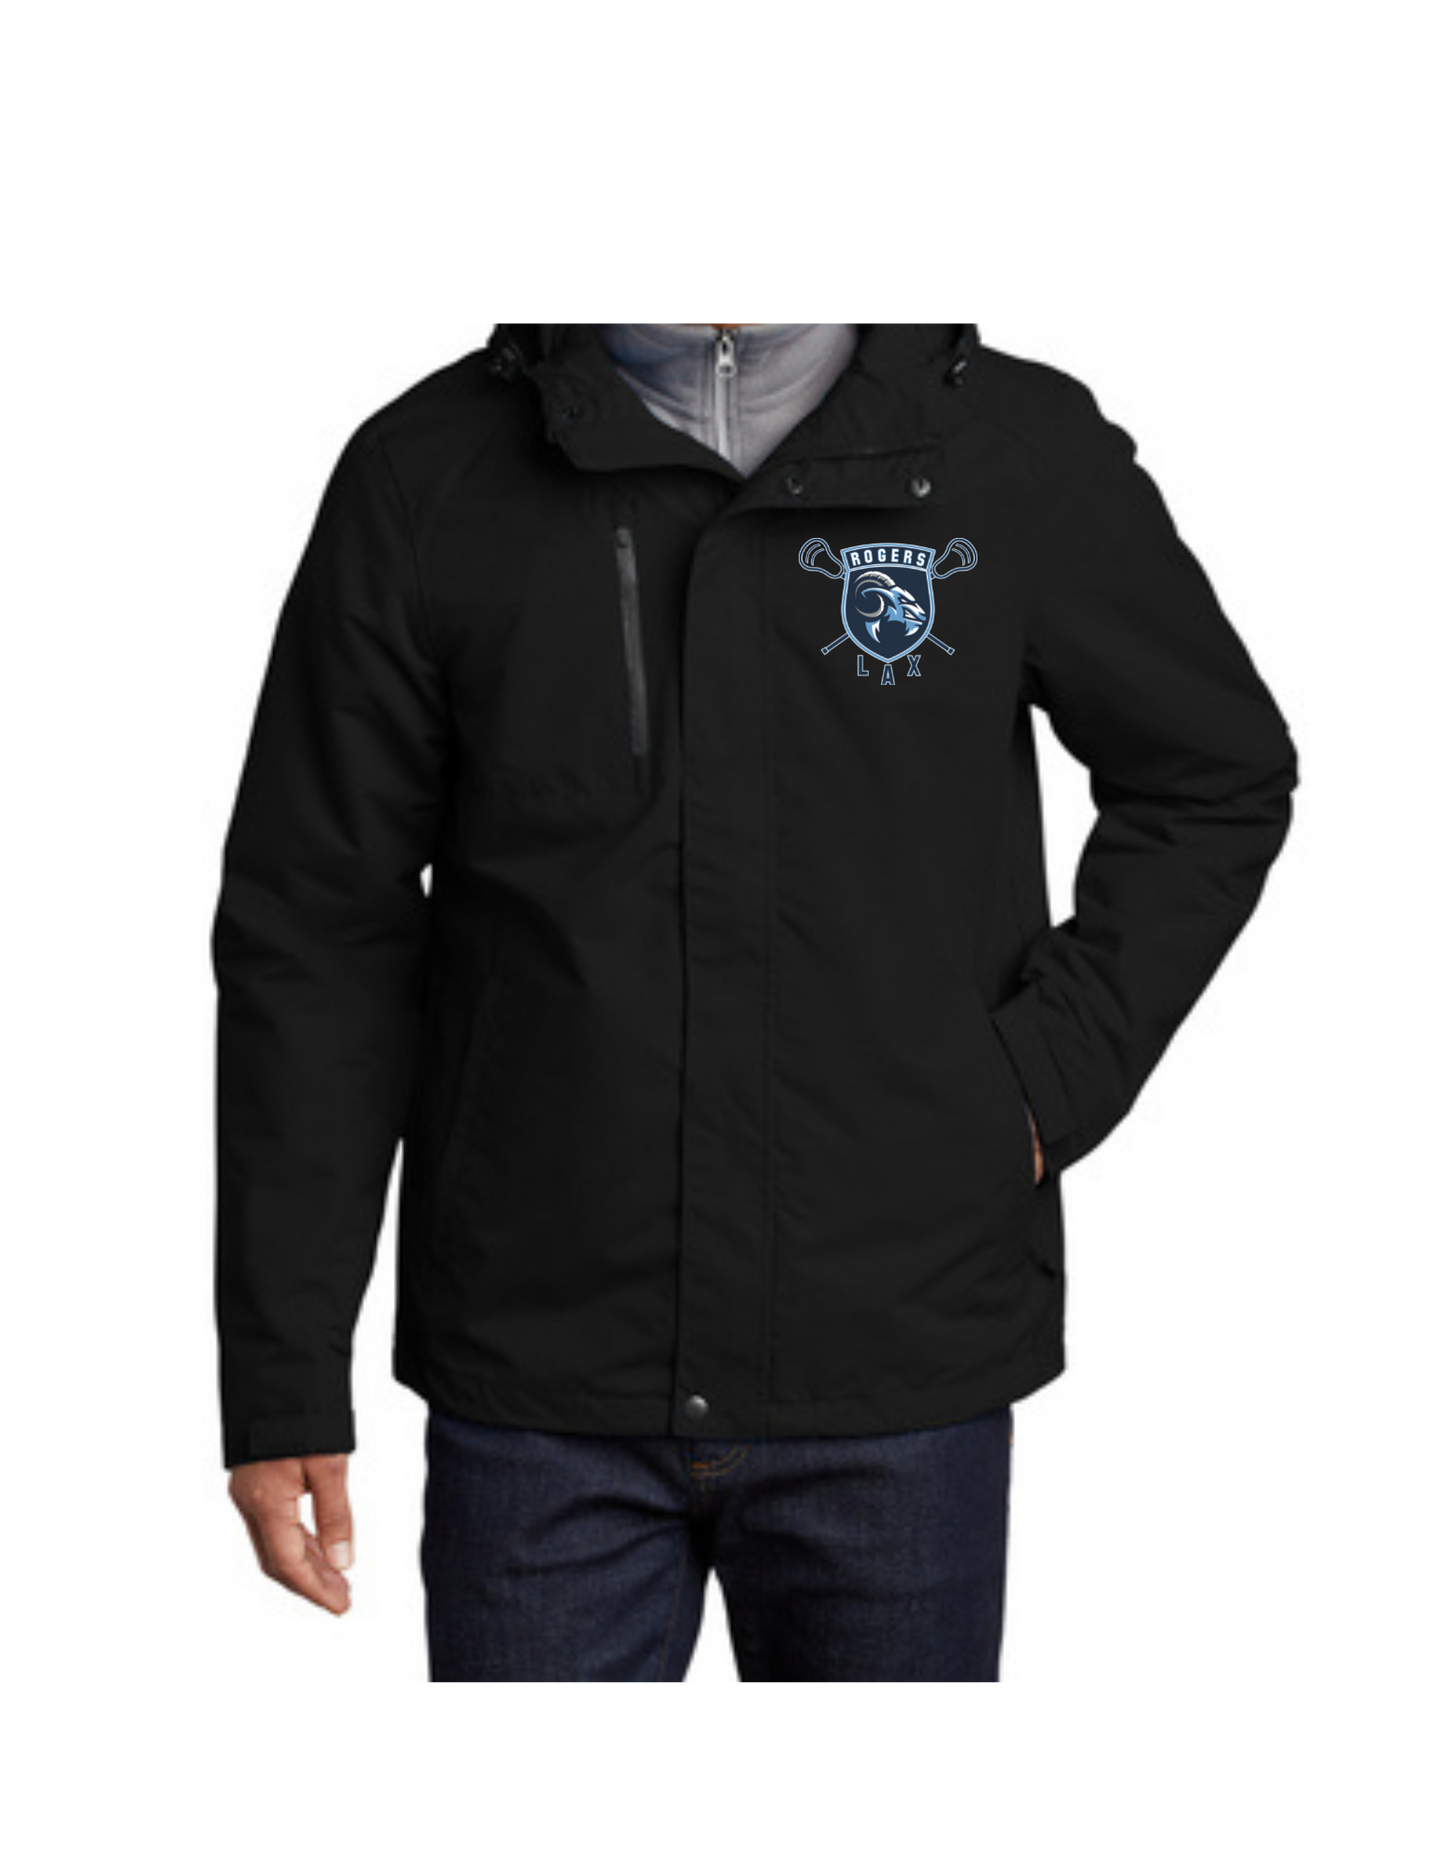 Rogers All-Conditions Jacket (click for additional options)